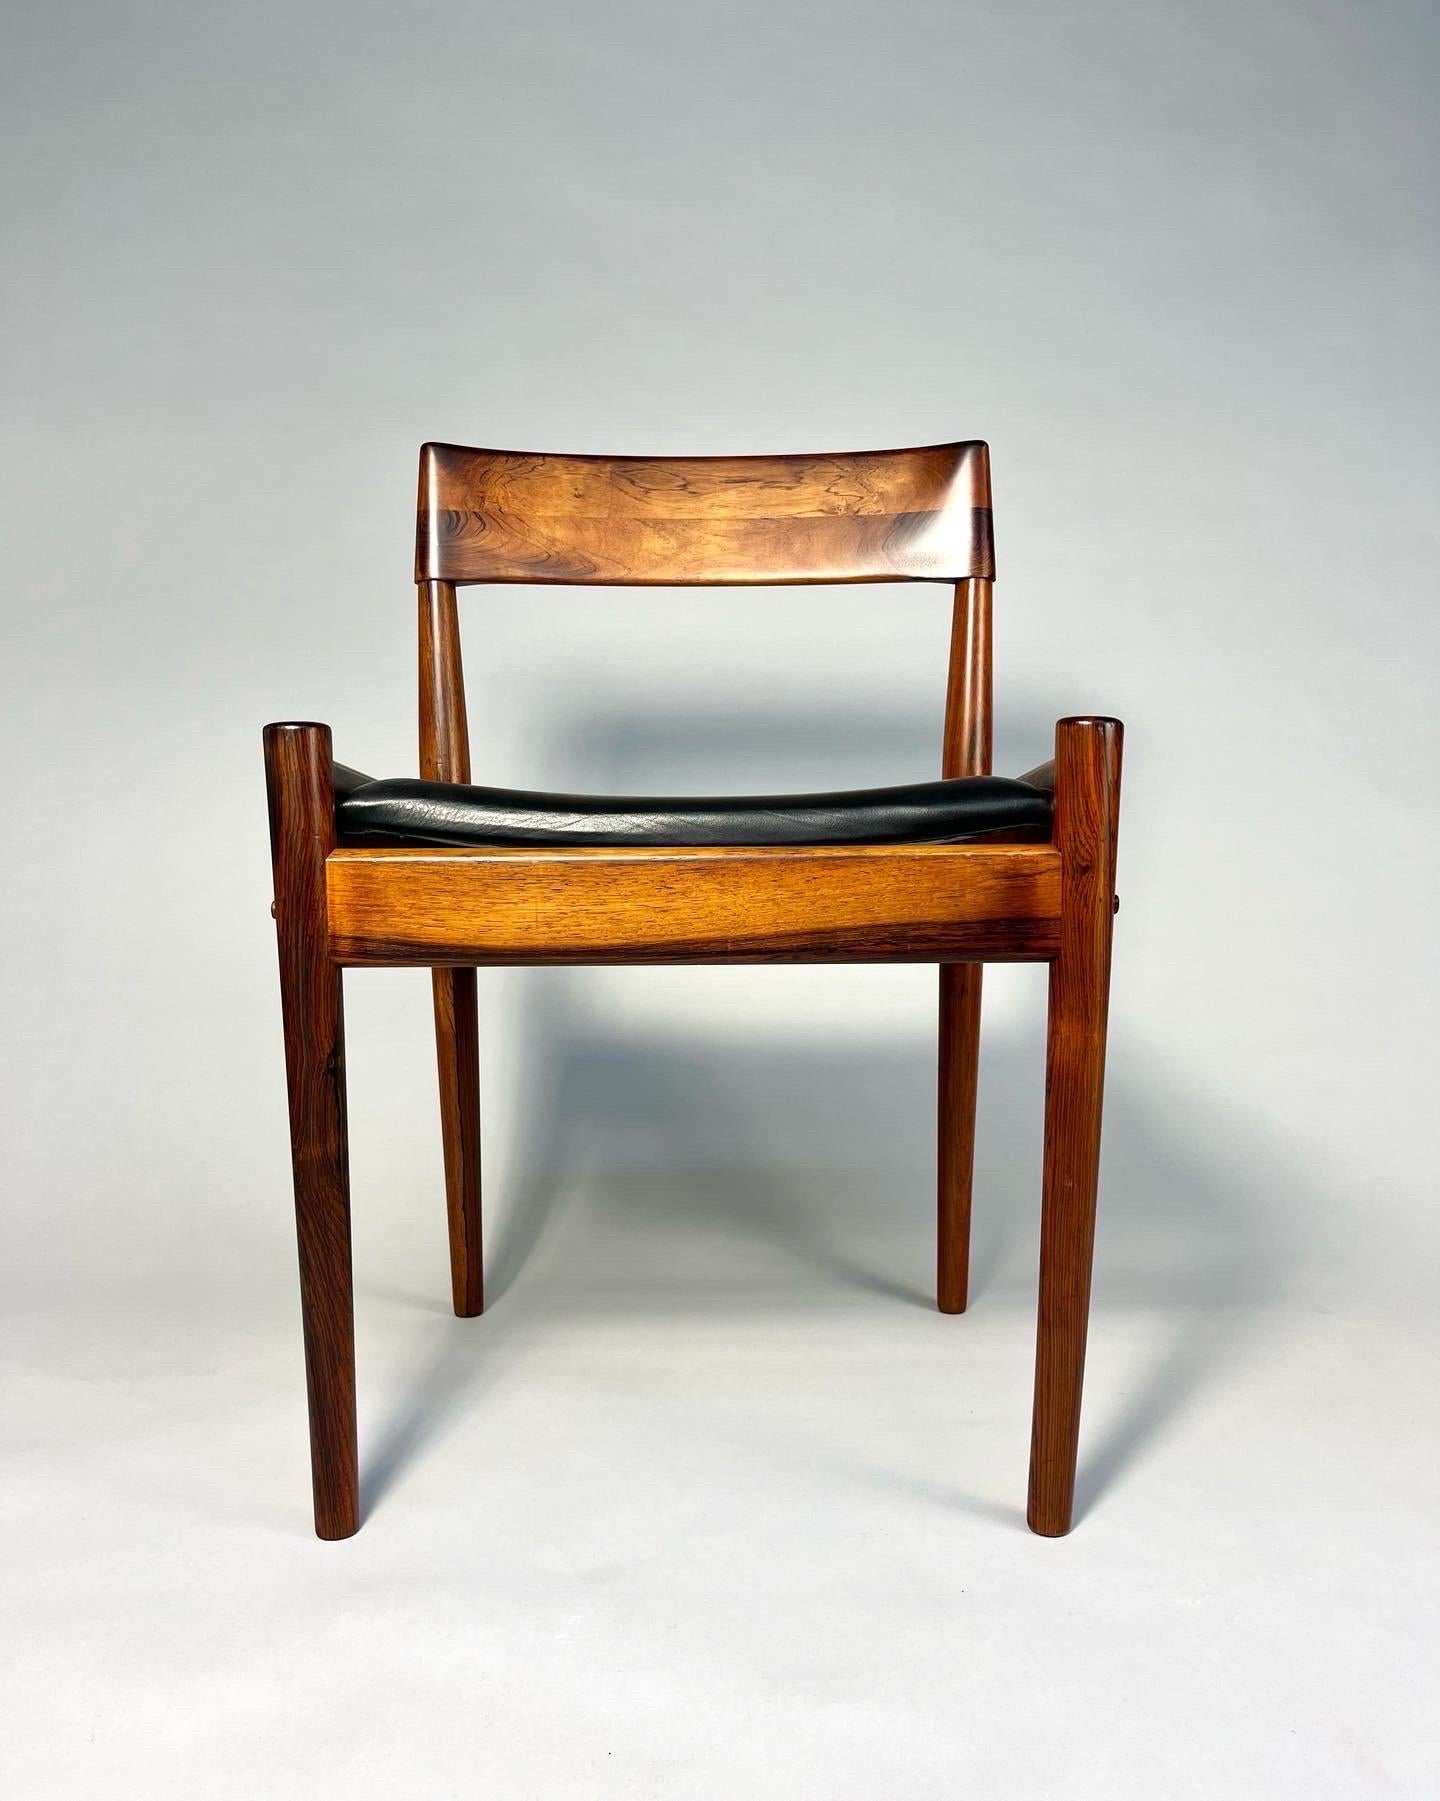 Hand-Crafted Set of Four Grete Jalk Chairs Rosewood P Jeppesen PJ4-2, Denmark, 1960s